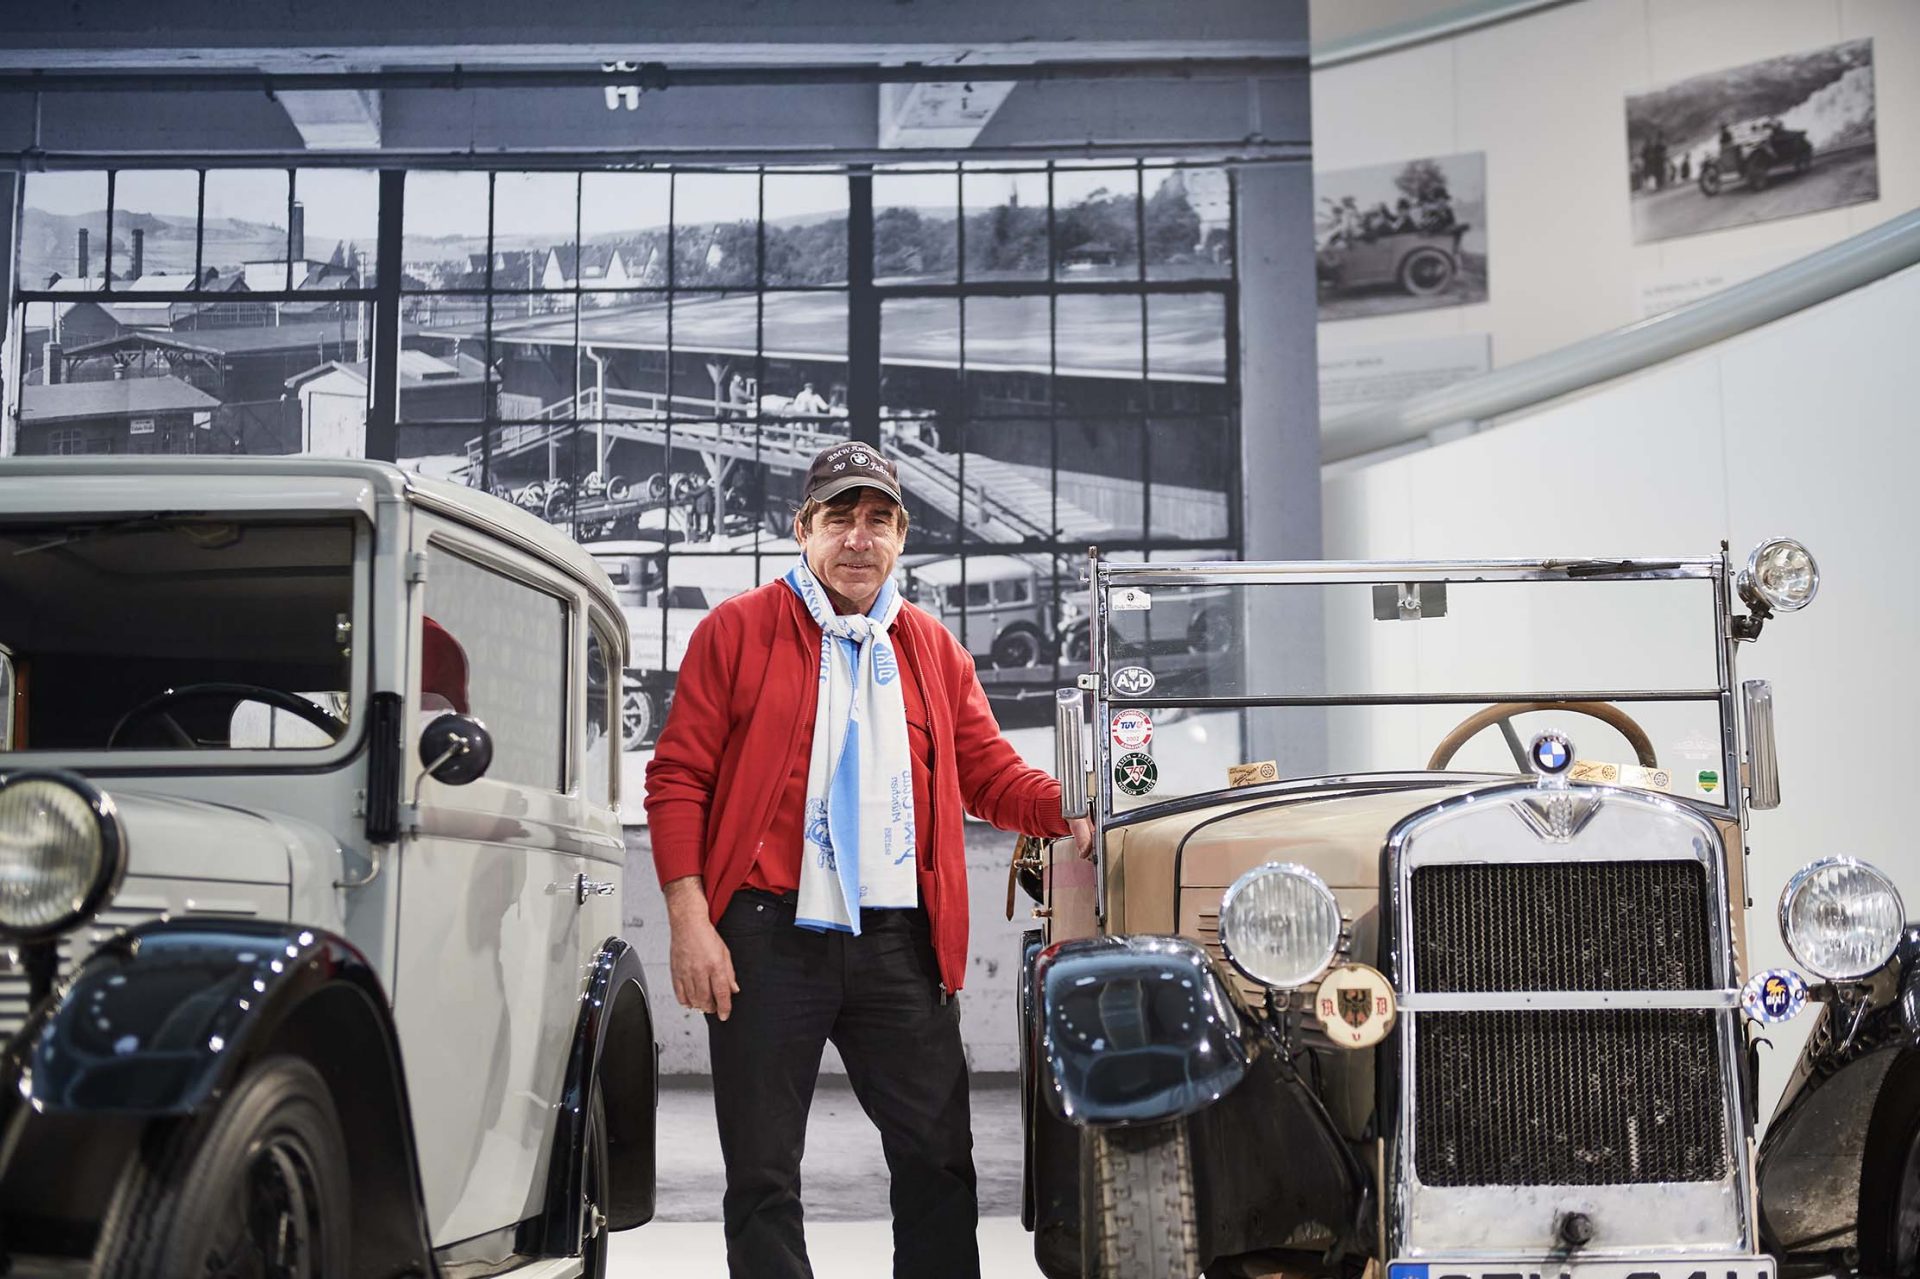 After racking up more than 80,000 km on the road, Lutz Schmidt is giving his well-travelled BMW 3/15 a thoroughly deserved break. It will be on show in the BMW Museum until May.